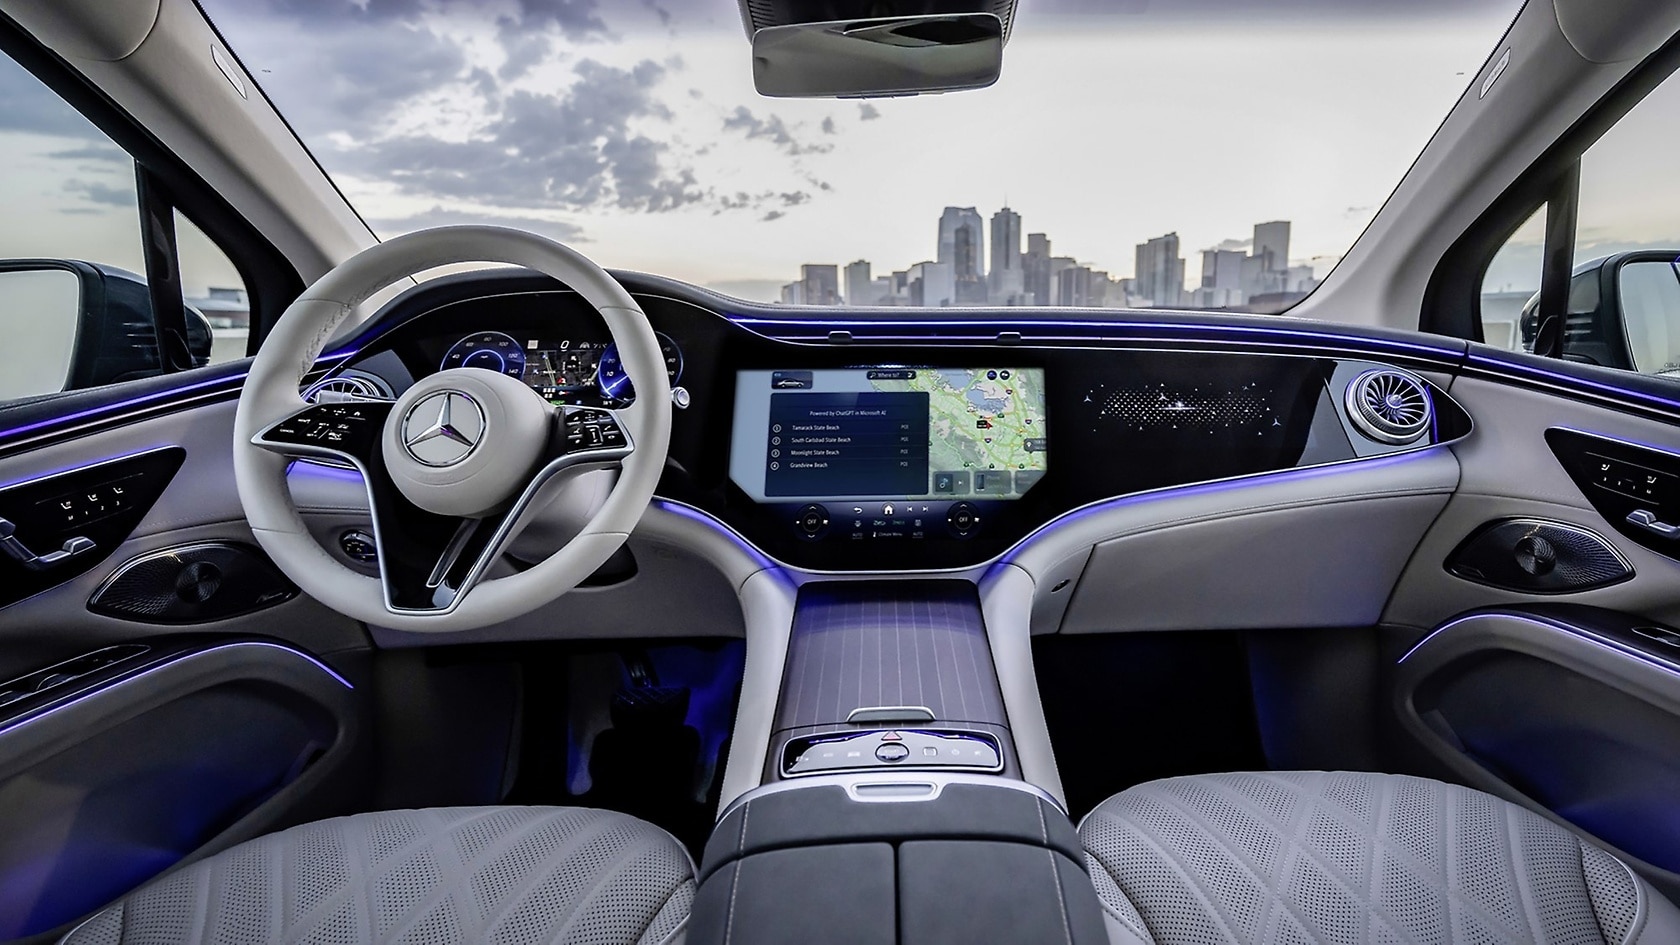 By adding ChatGPT, voice control via the MBUX Voice Assistant's Hey Mercedes will become even more intuitive.